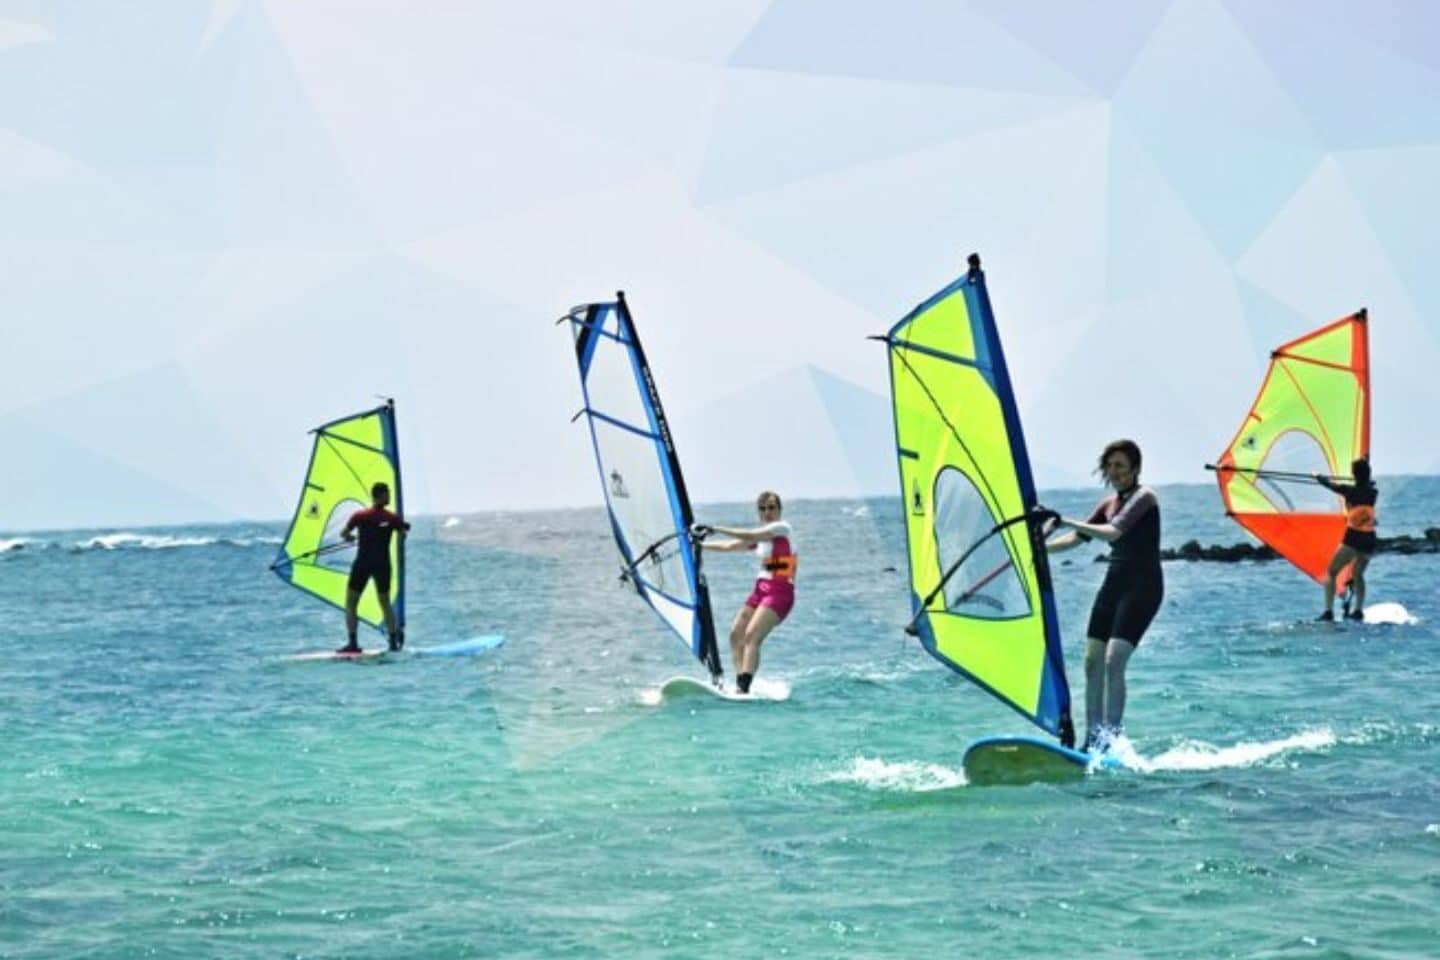 Racing of four wind surfers